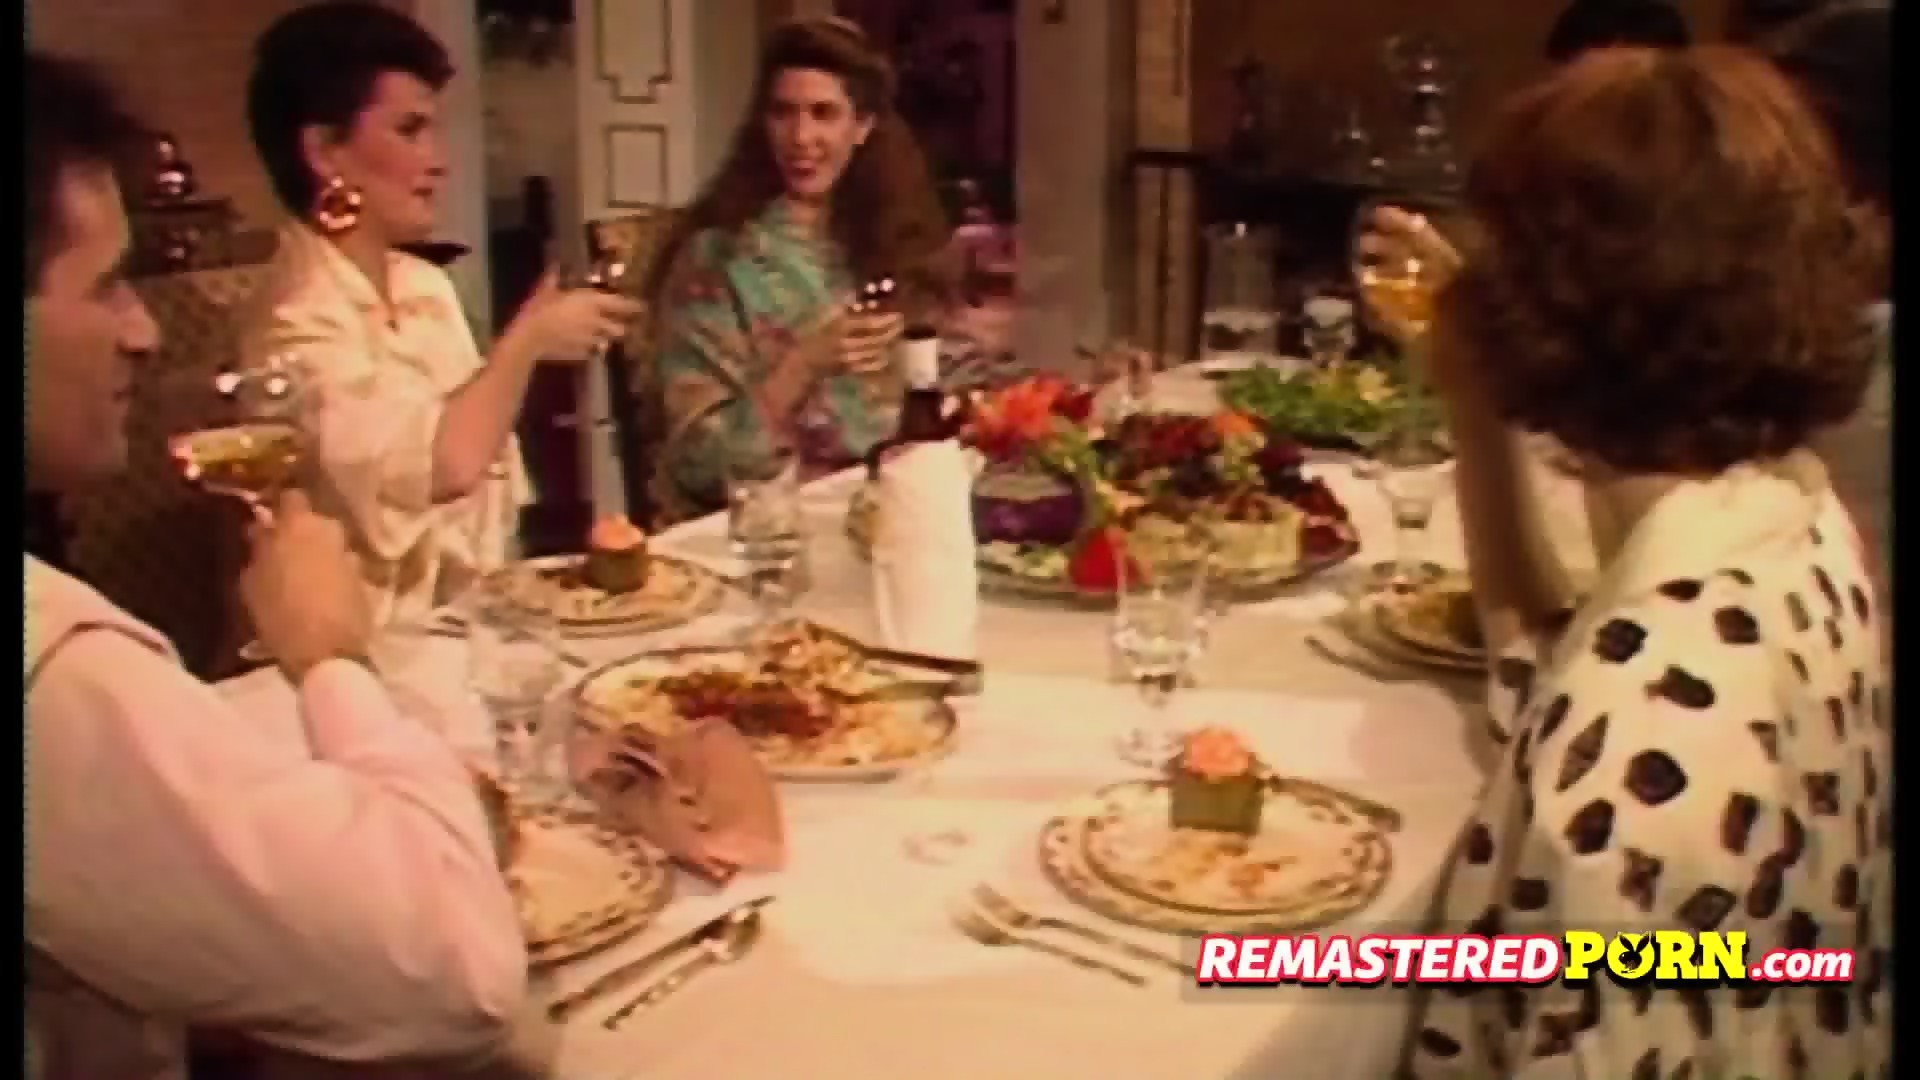 Vintage Couple Has A Very Nice Exciting Dinner Together